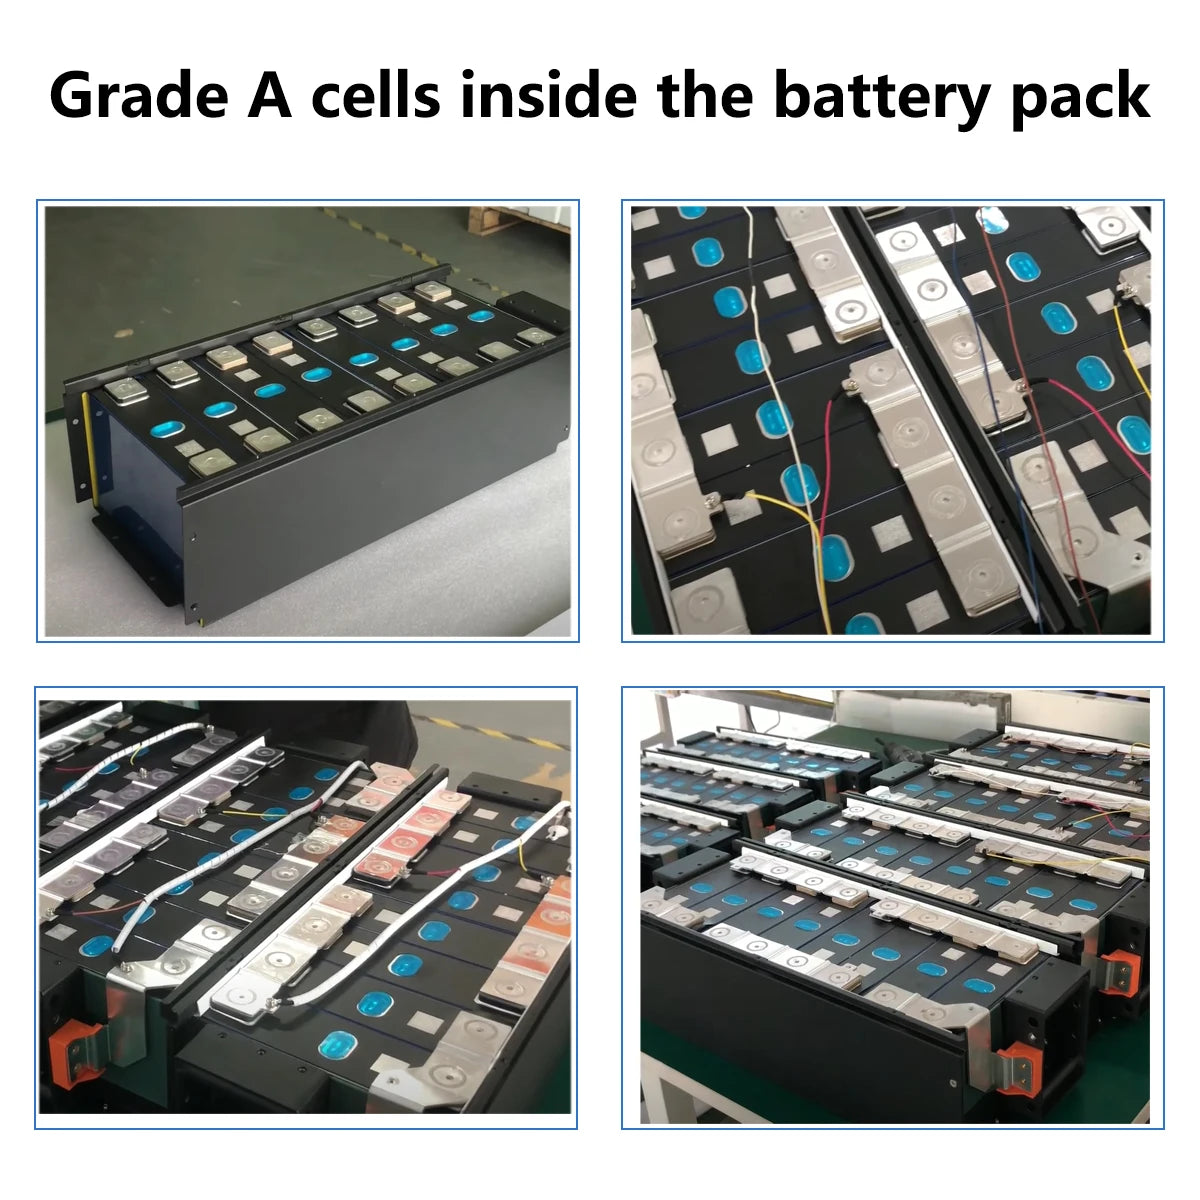 LiFePO4 Battery, High-quality LiFePO4 cells are used in this reliable battery pack.